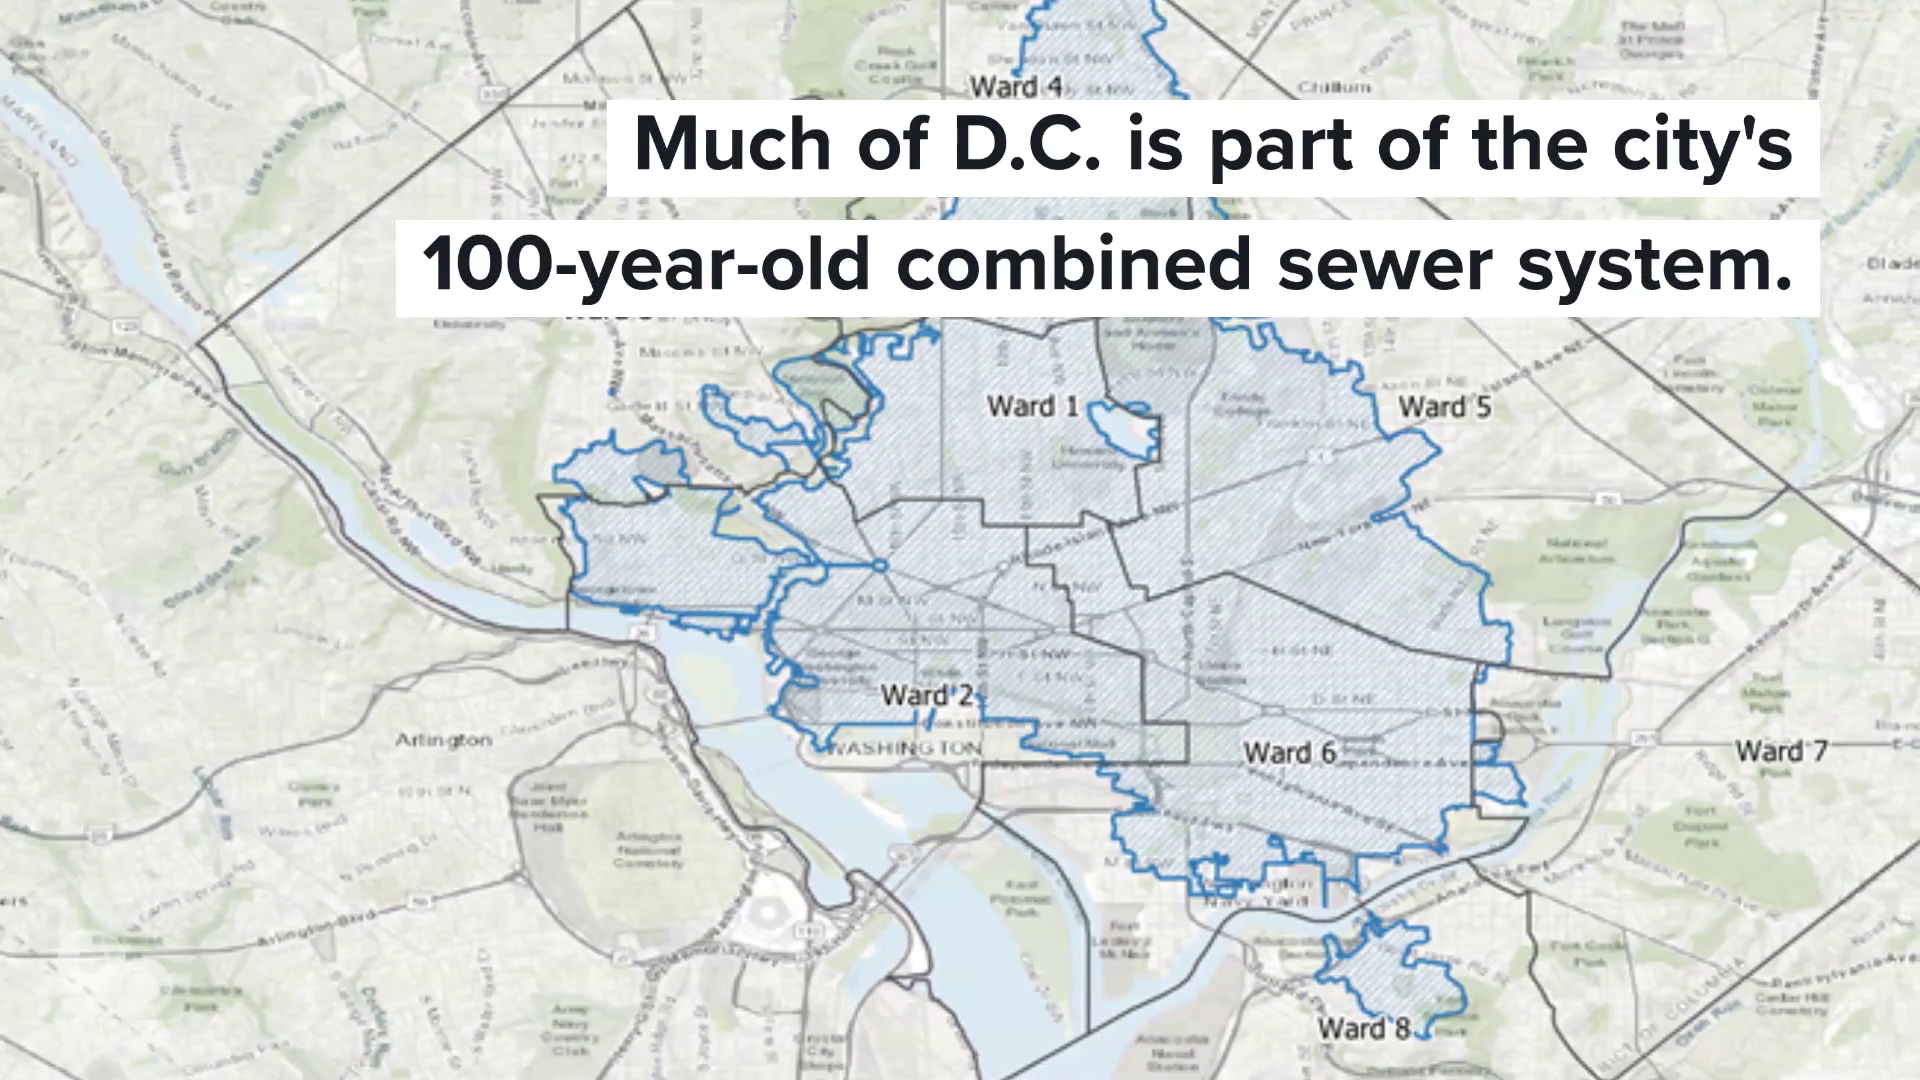 Monday's storm dropped nearly a month's worth of rain on D.C. – and caused an estimated 50 million gallons of combined sewage to overflow.